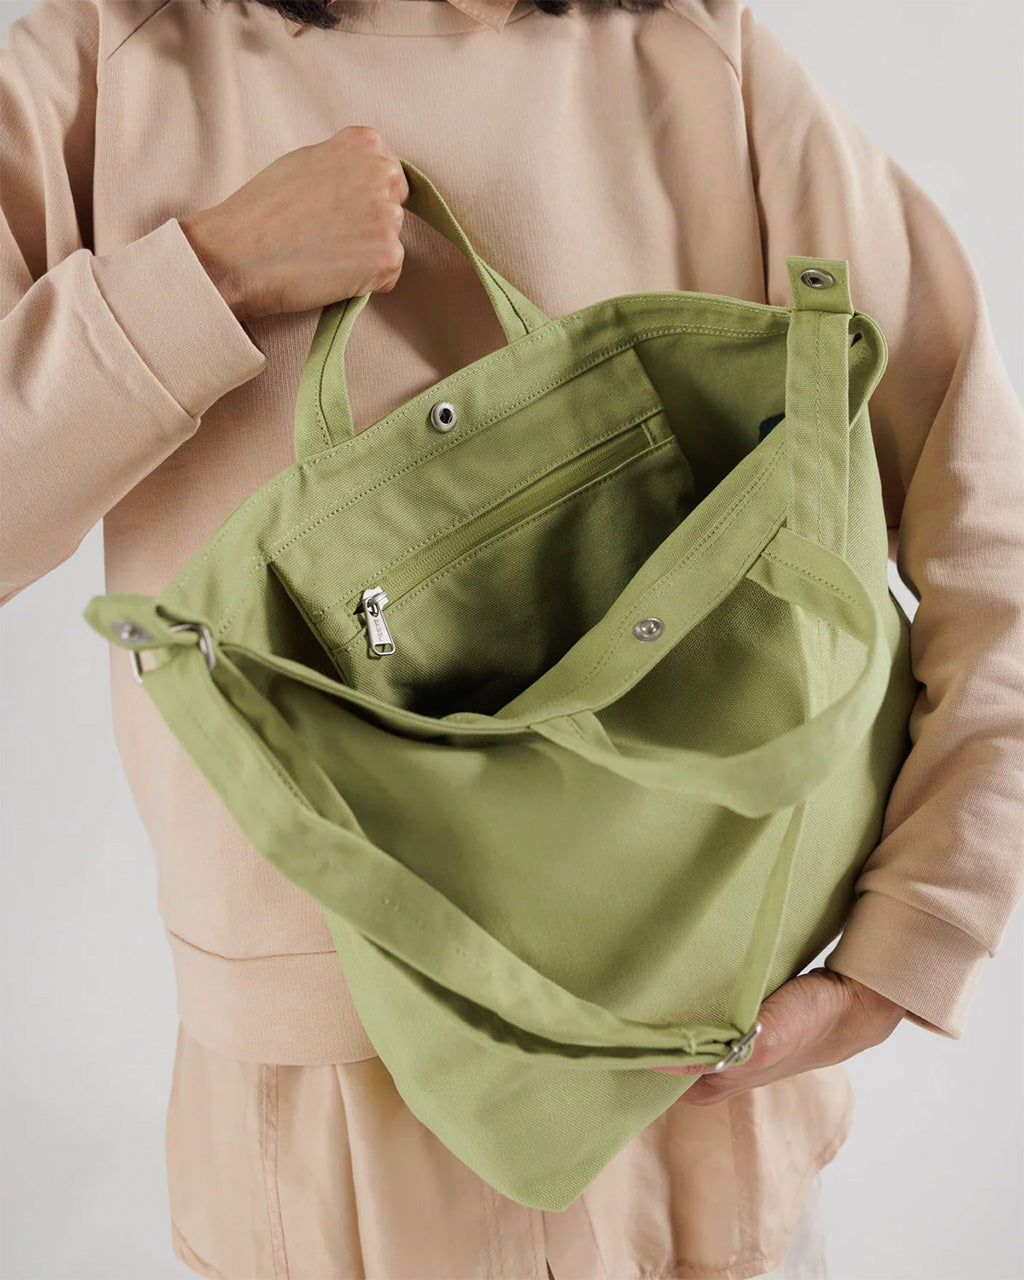 Baggu Duck Bag Review  A lightweight washable canvas tote